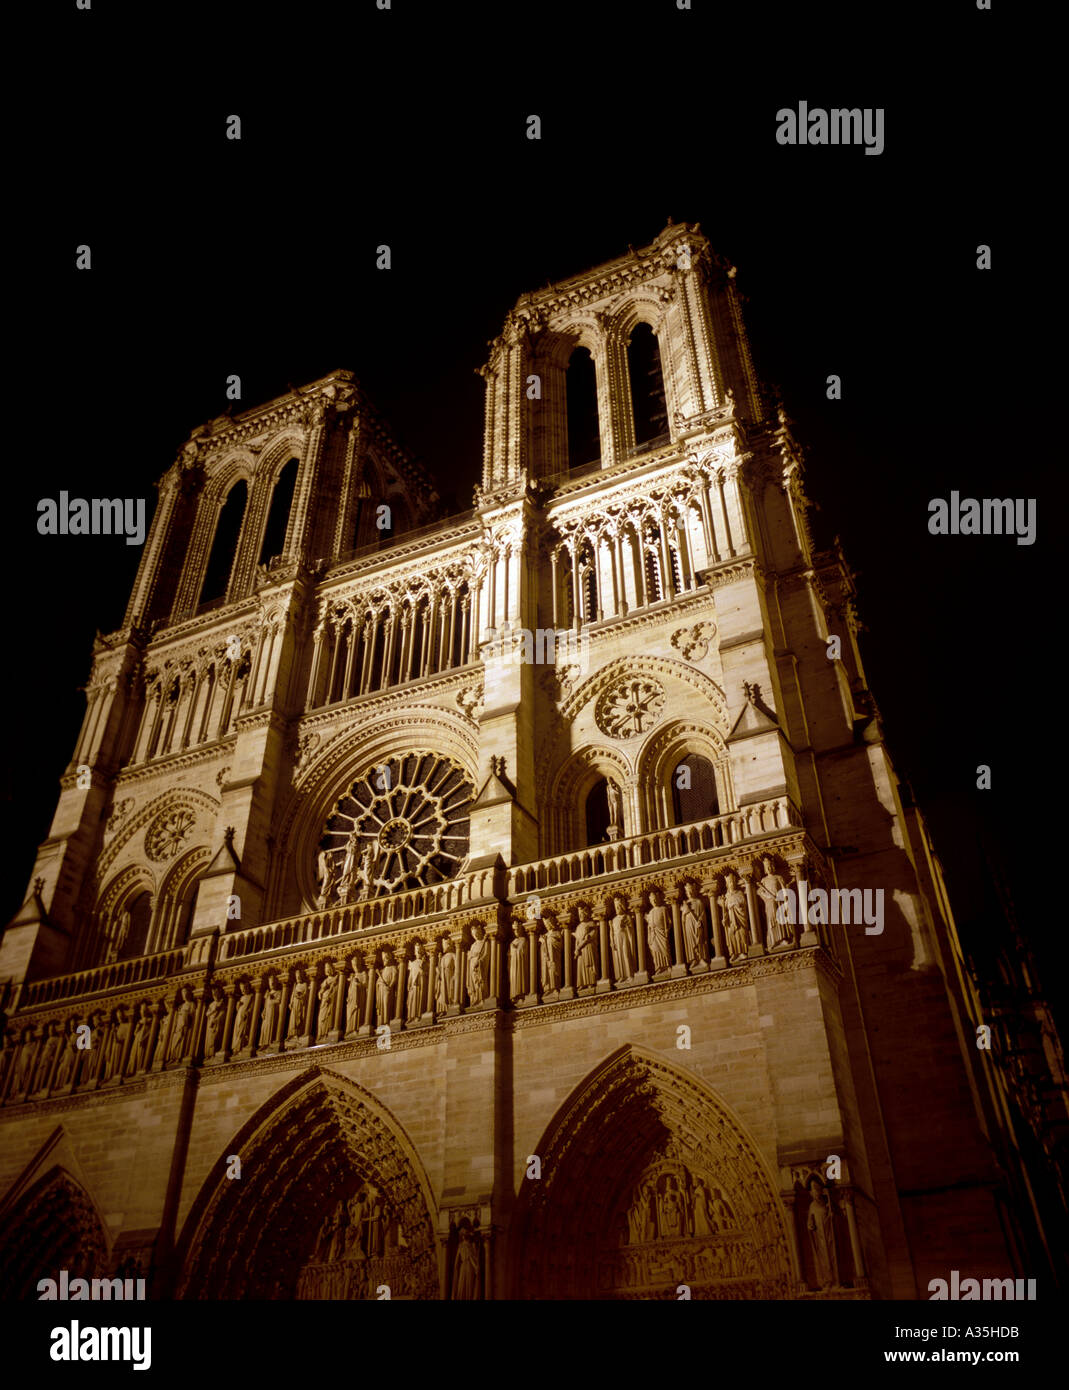 Looking up at Notre Dame Cathedral in Paris France prior to the devastating April 15, 2019 fire. Stock Photo